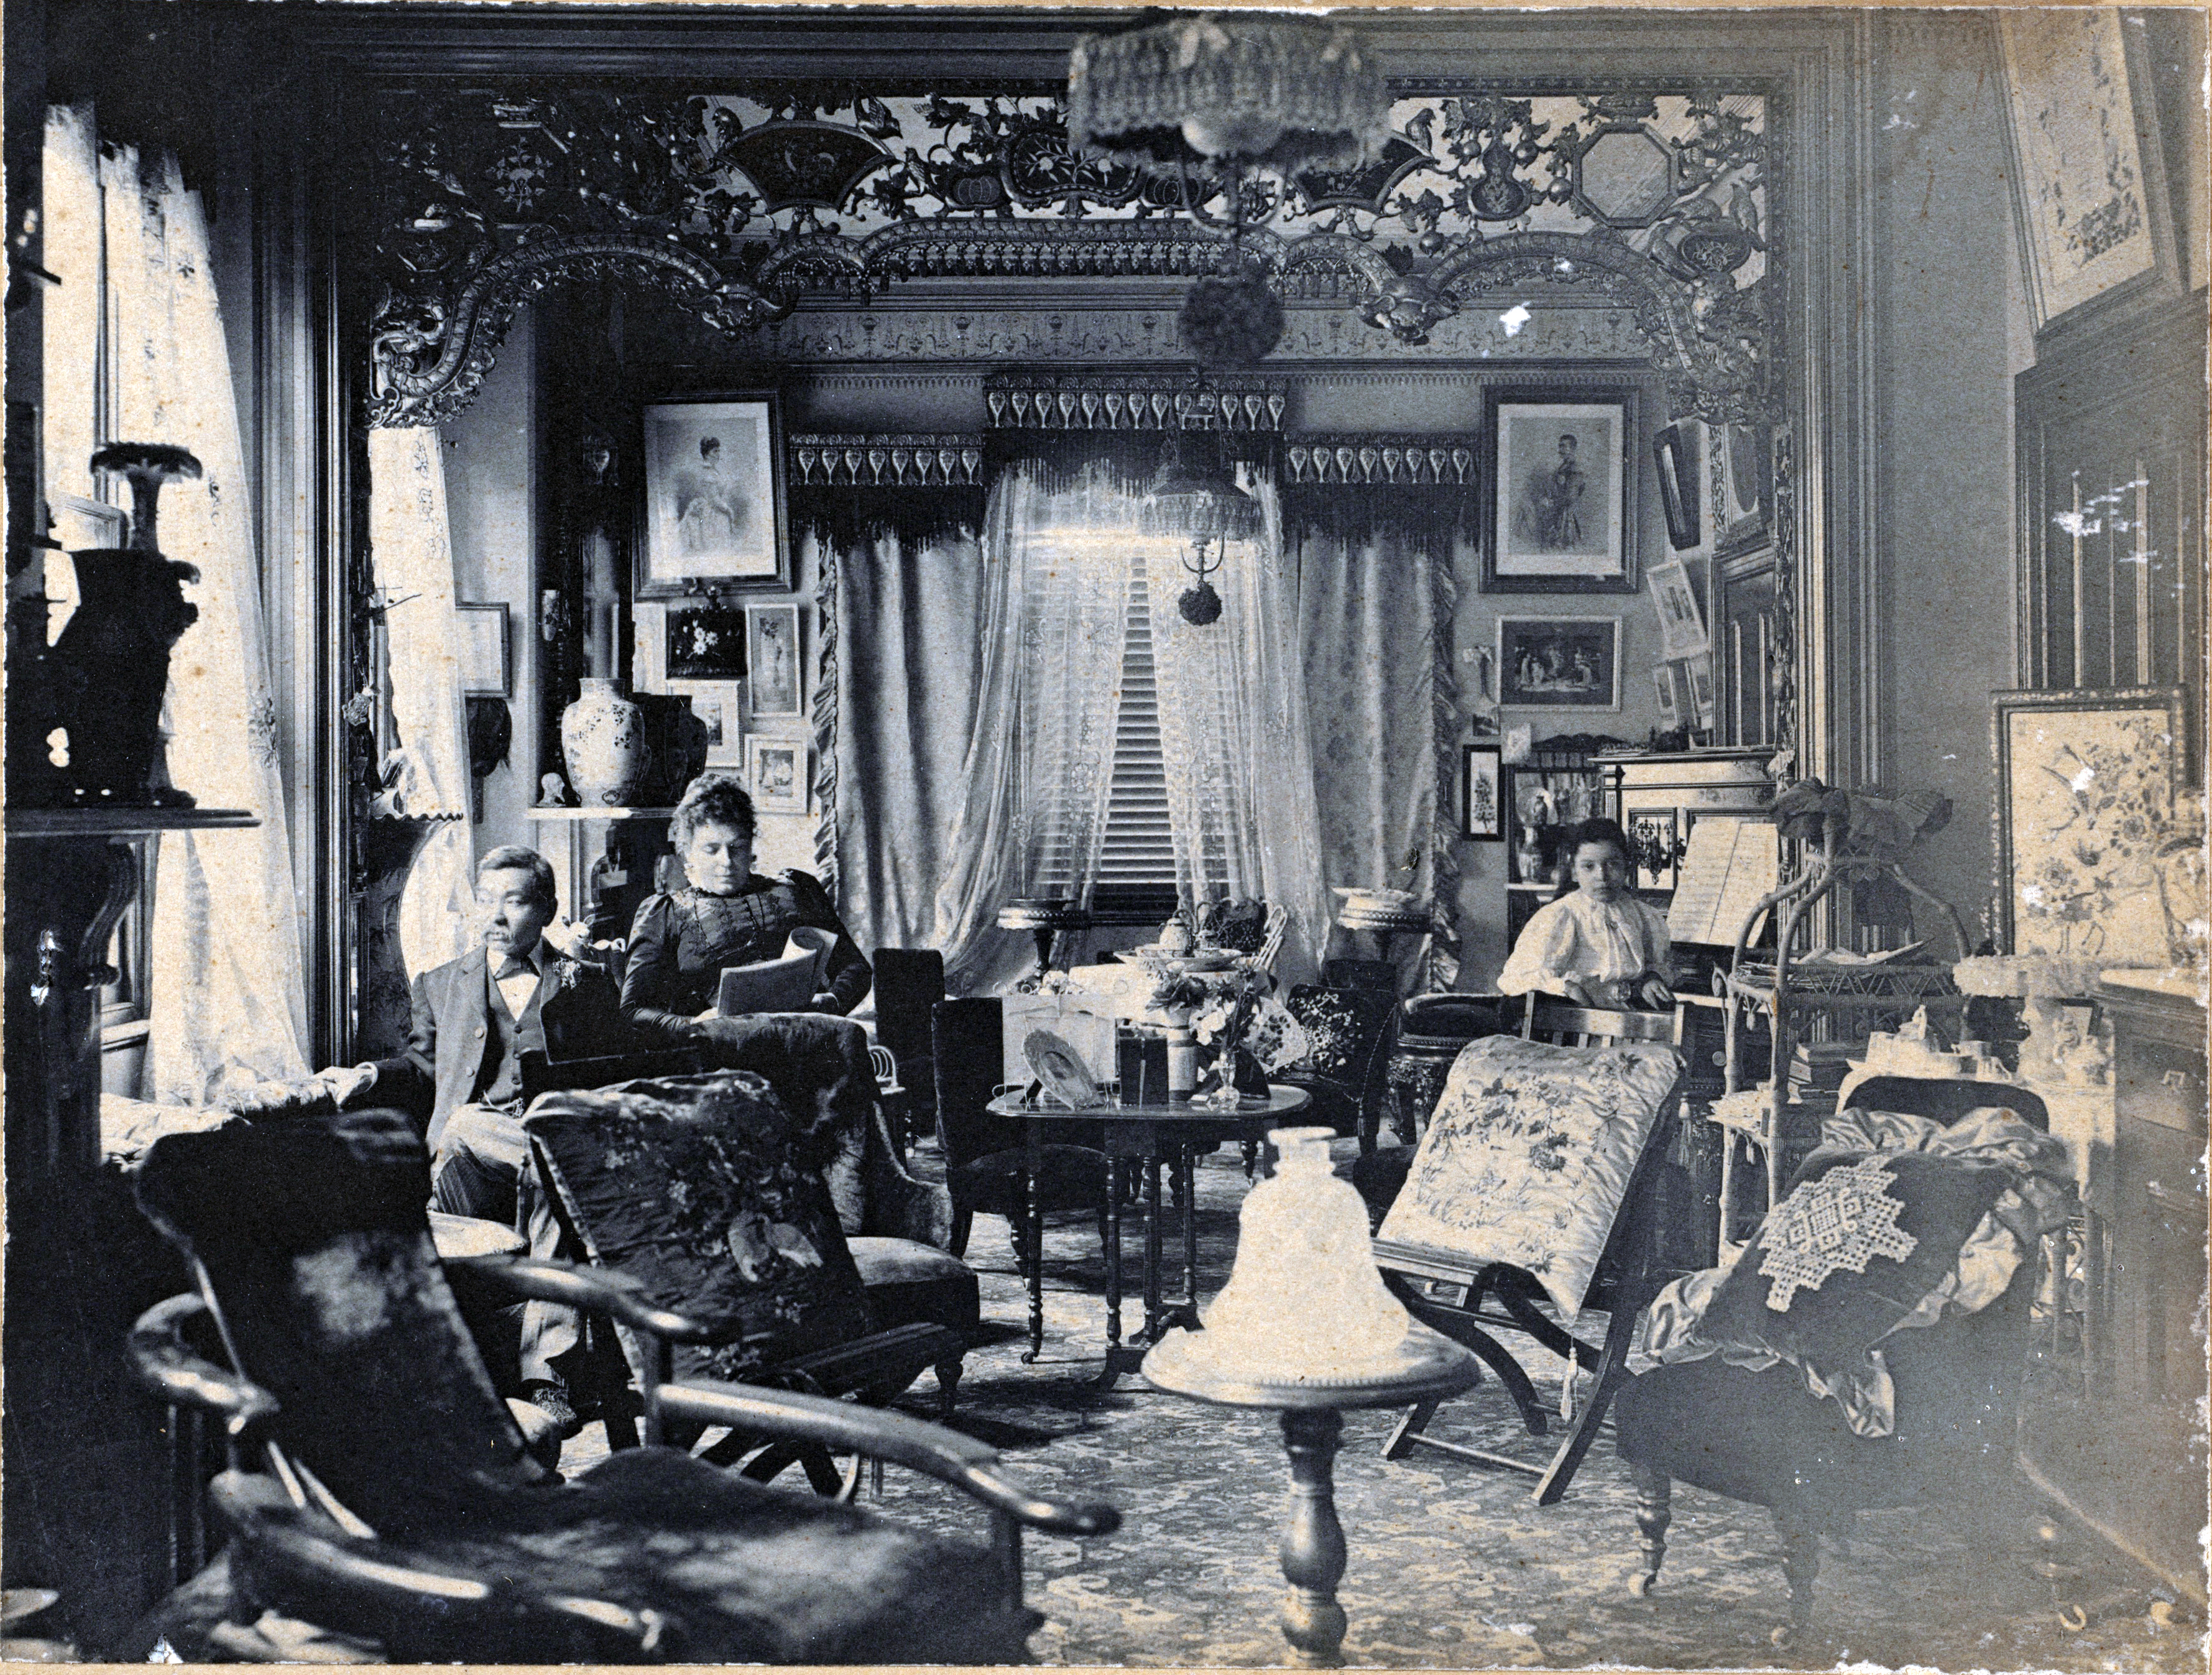 Image 2 of 6 - Black and white image of a room with wooden chairs, paintings and décor. Quong sitting on the left-hand side, looking out a window with his wife next to him reading a magazine. One child sitting to the right of the image looking at the camera.